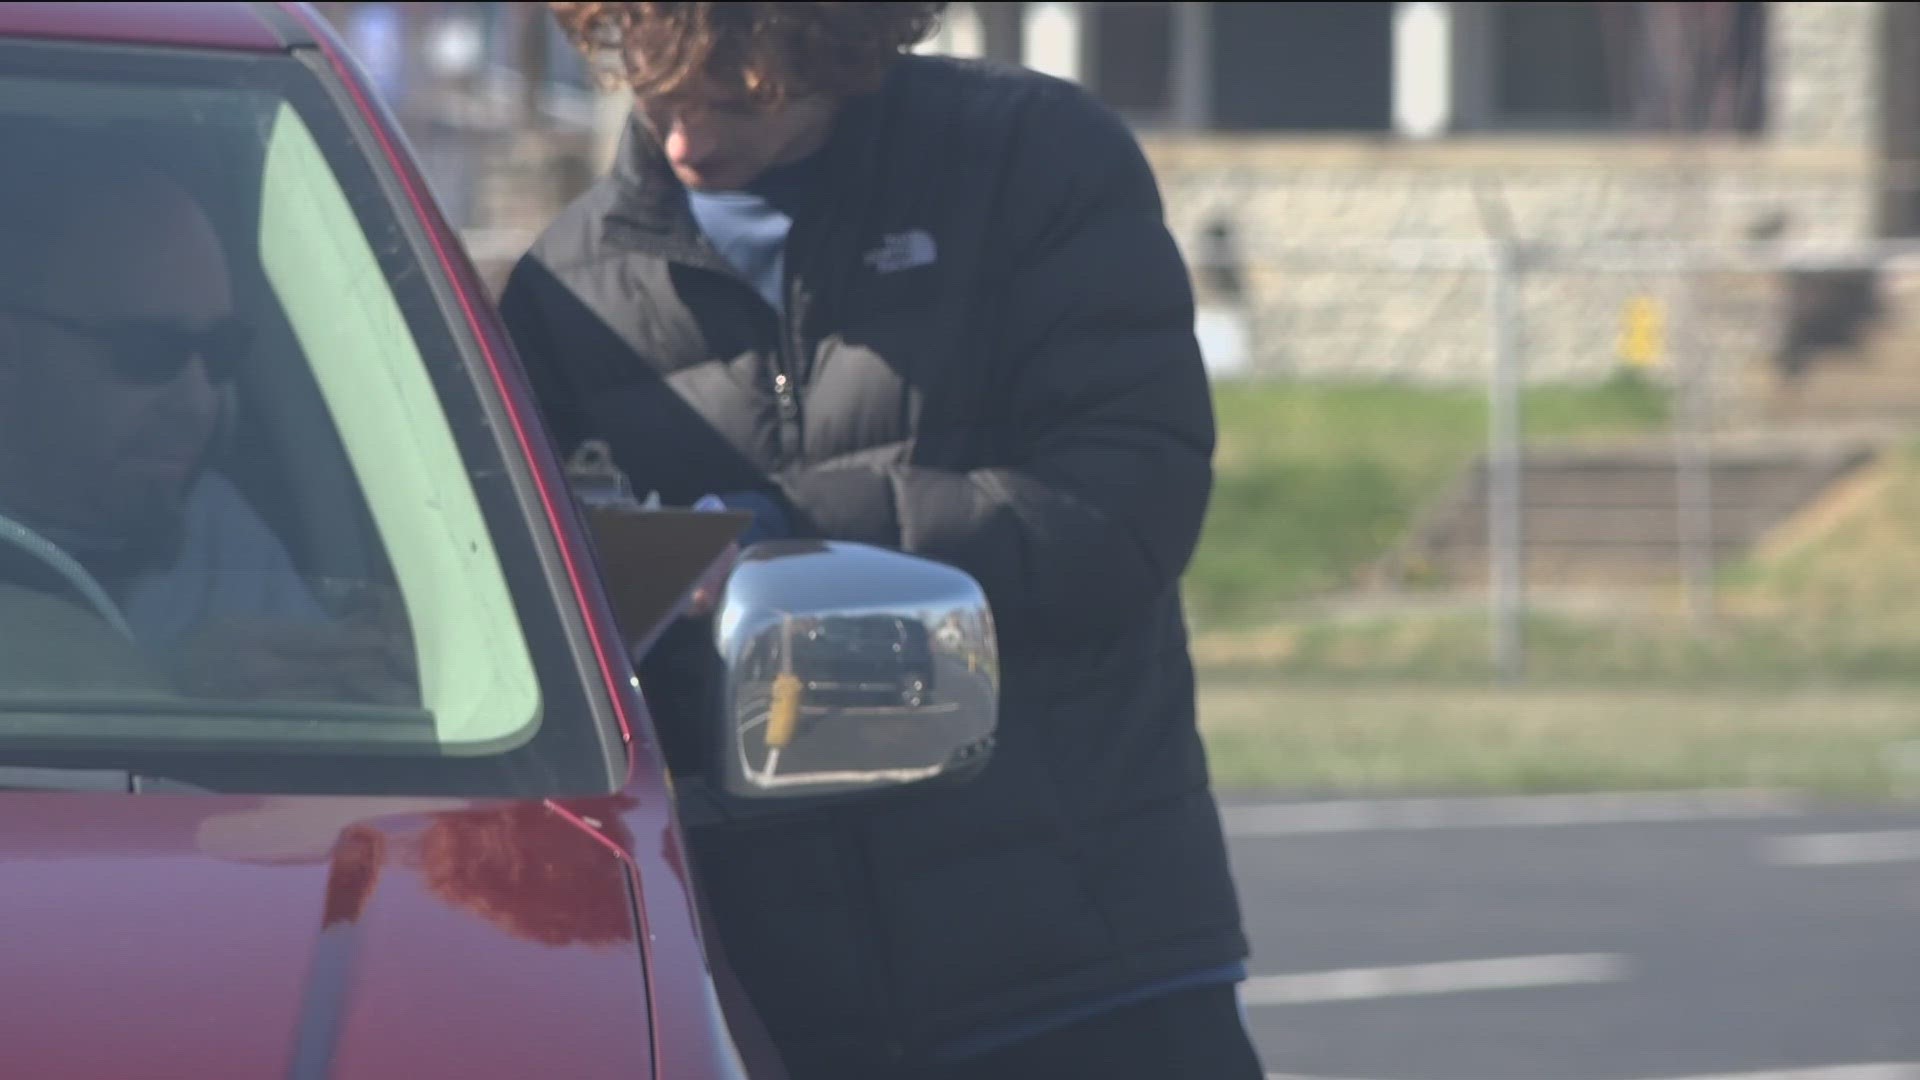 Rep. Michele Grim (D-OH) was outside United Auto Workers Union 12 on Saturday collecting signatures one day after a Texas judge halted an FDA-approved abortion pill.